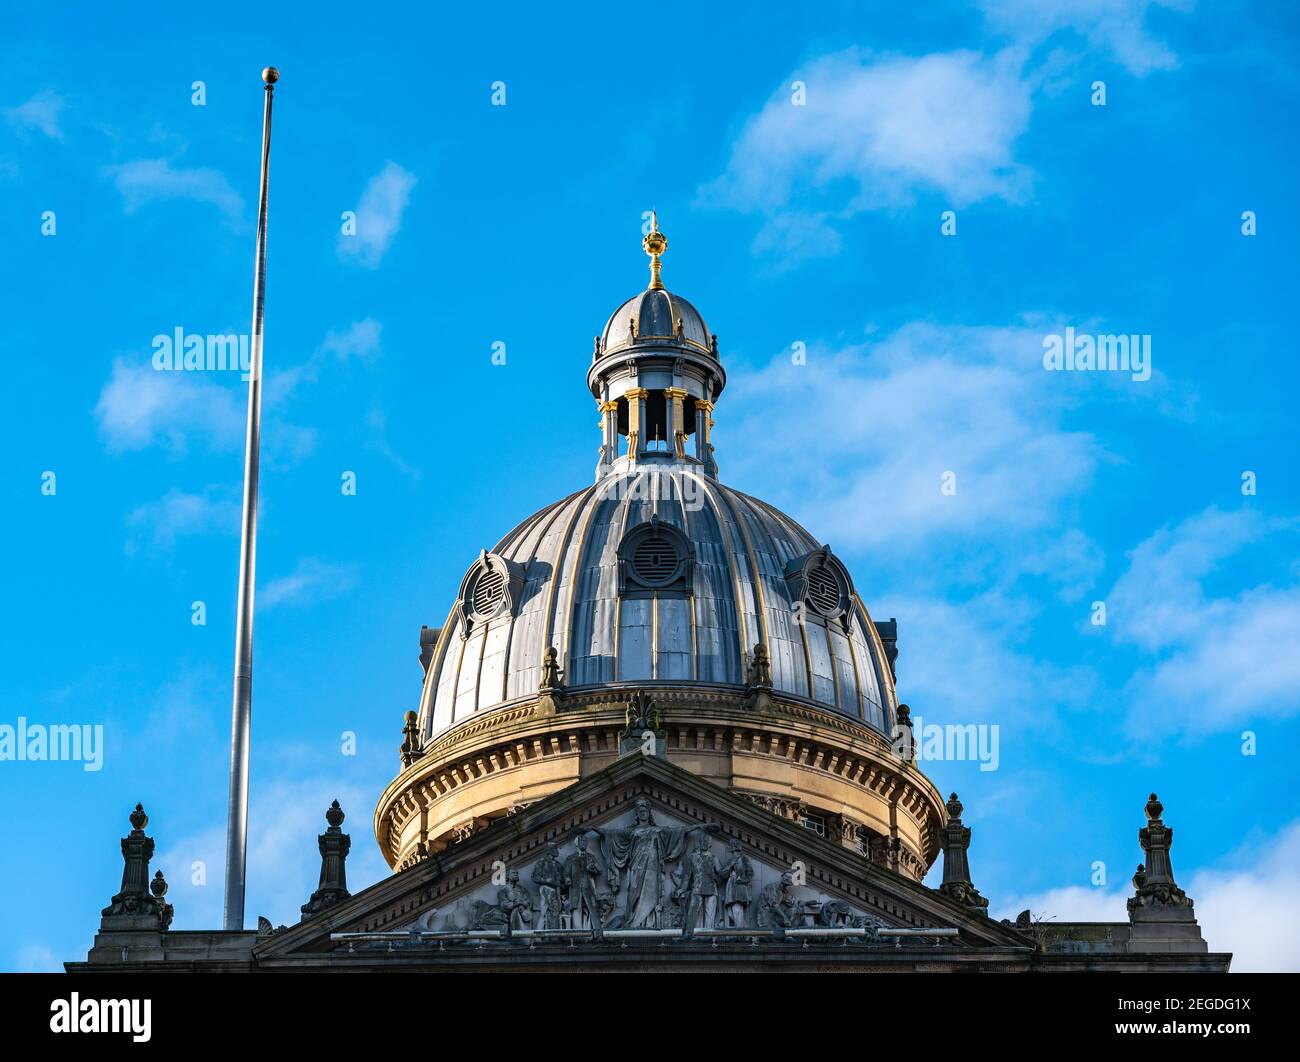 Dome atop the town hall in Birmingham, West Midlands, UK Stock Photo